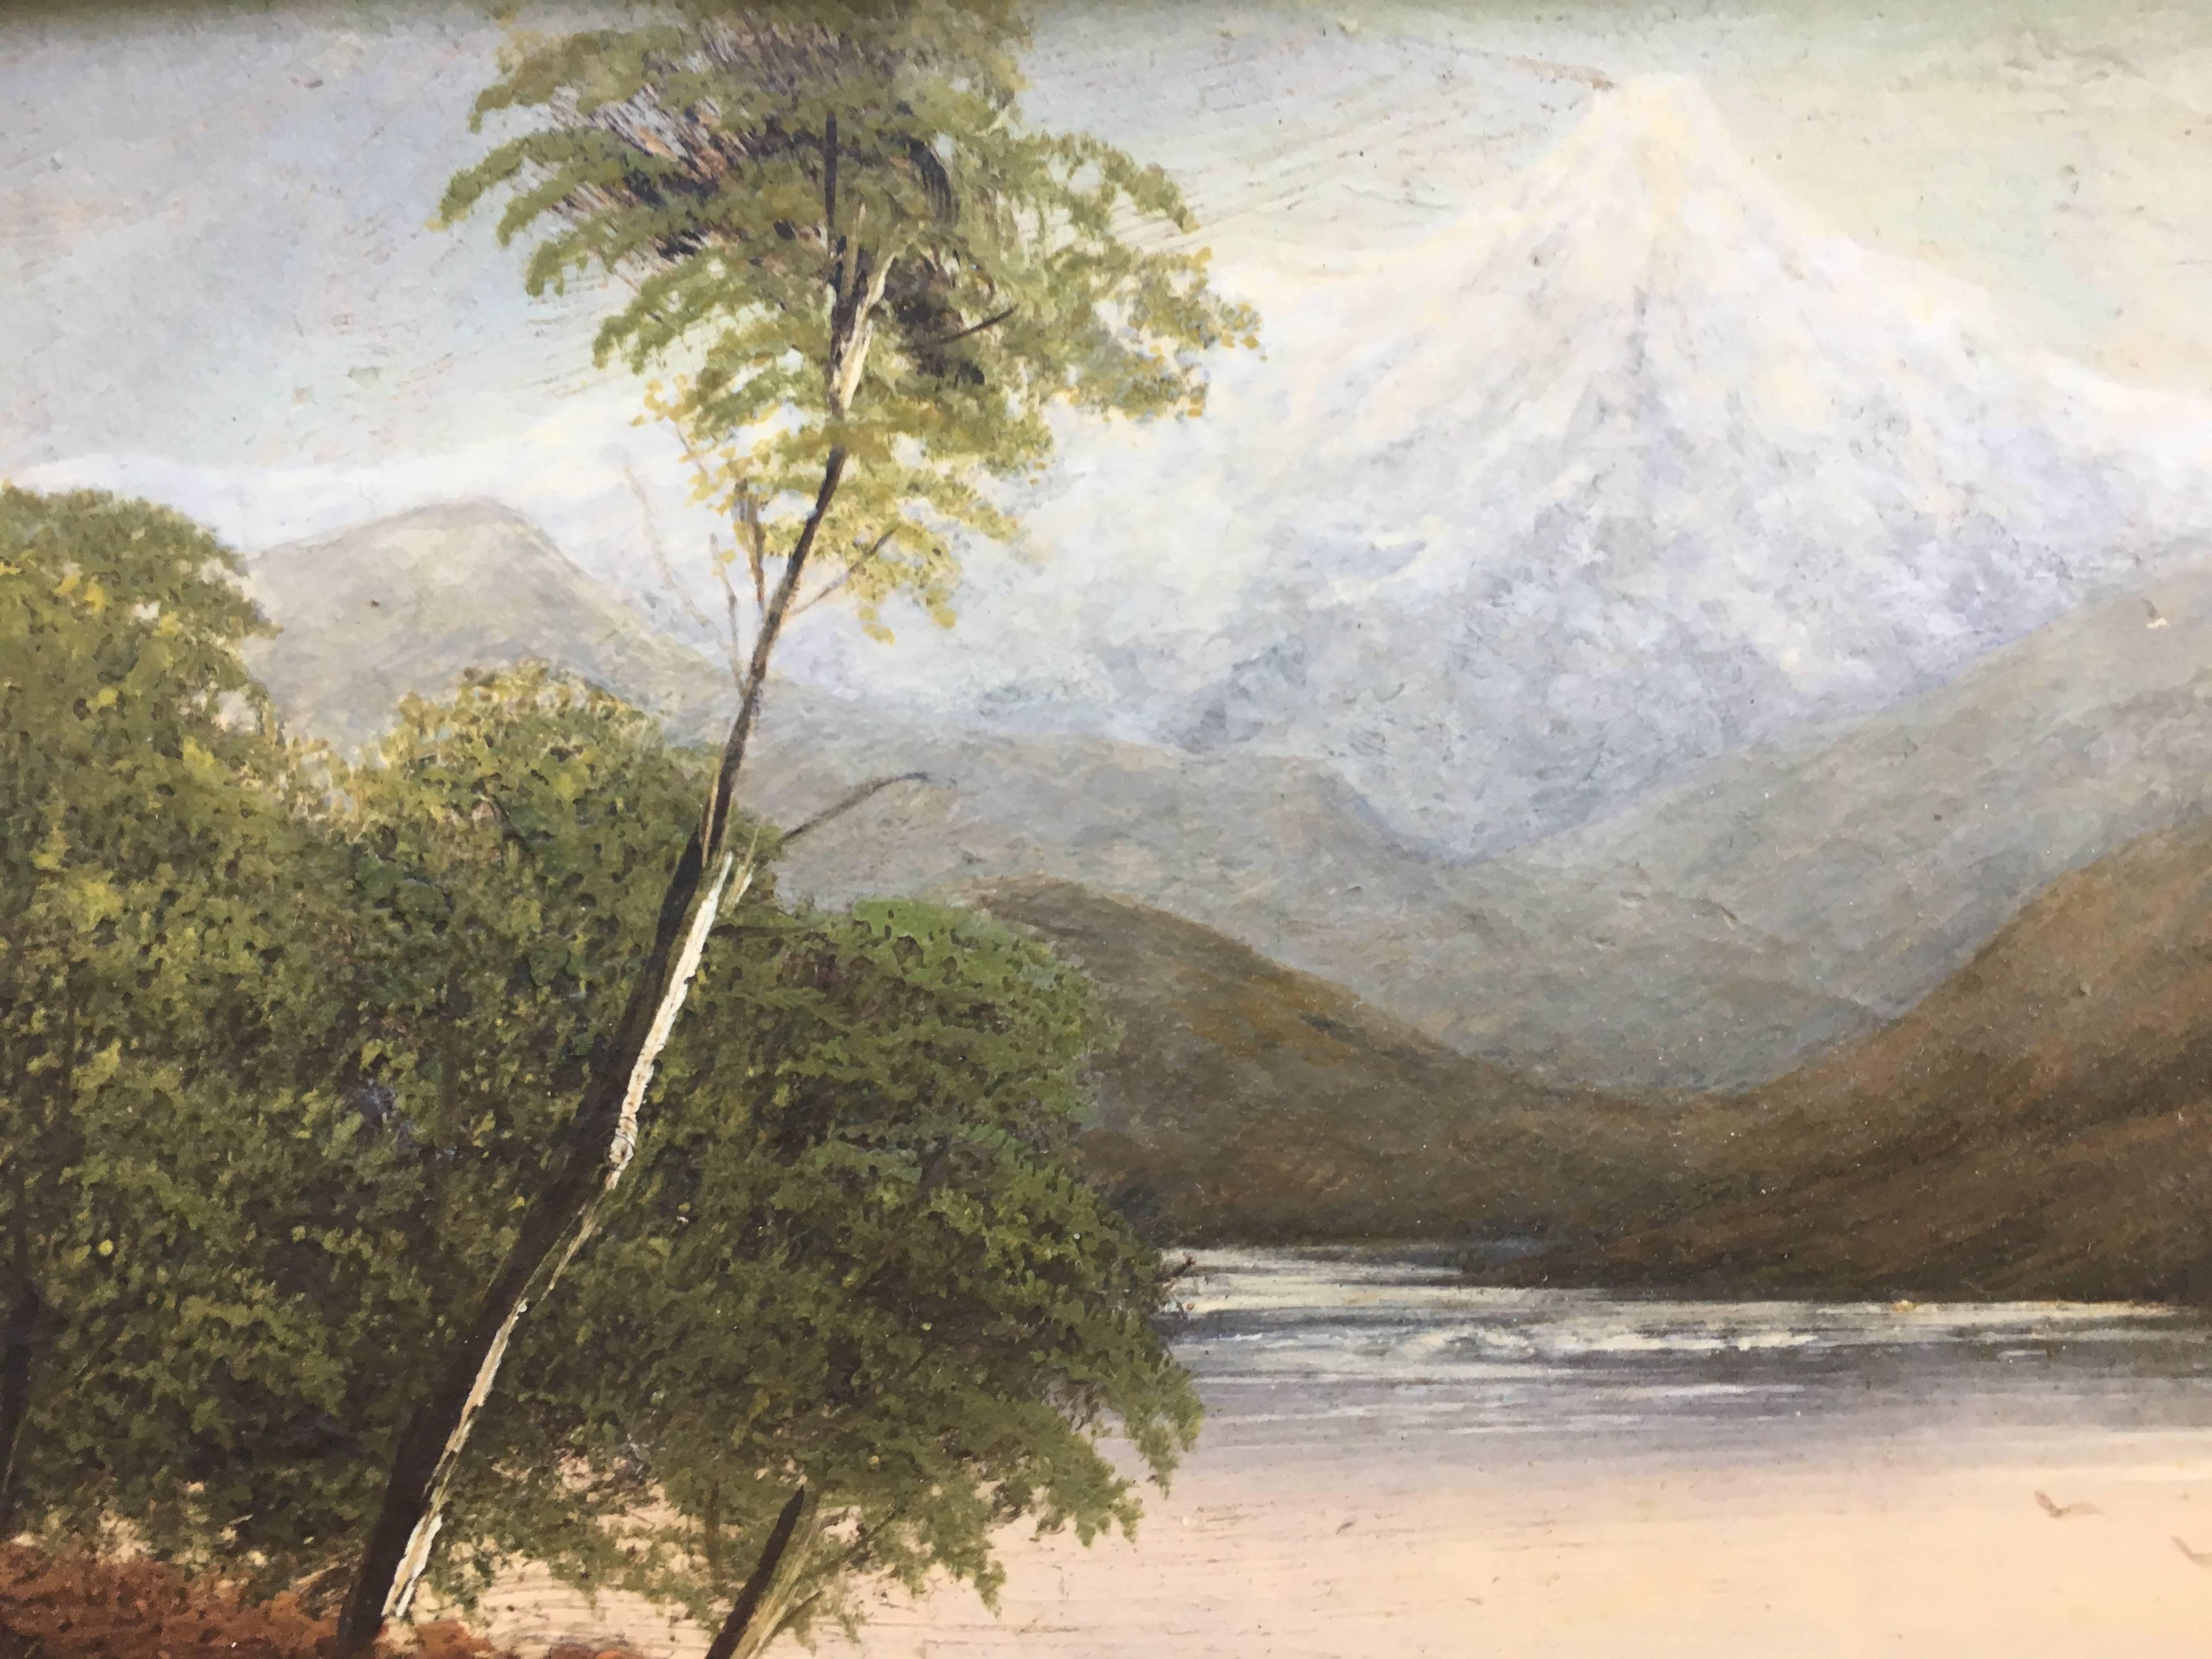 Lake Scene with Snow Capped Mountain - Gray Landscape Painting by Grafton Brown